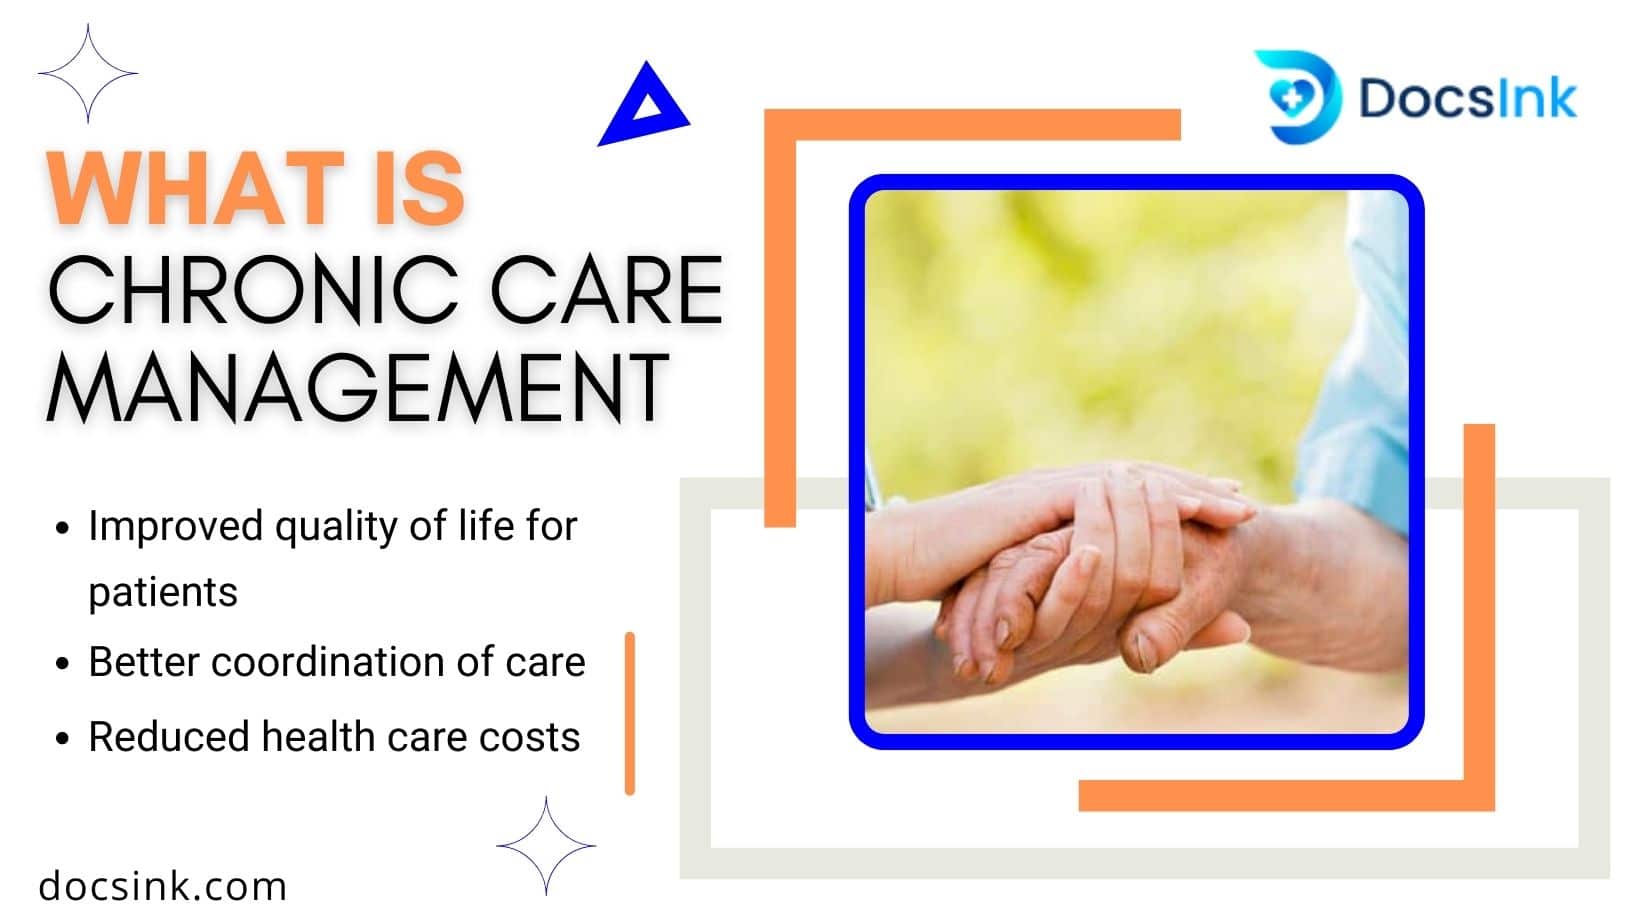 What Is Chronic Care Management?